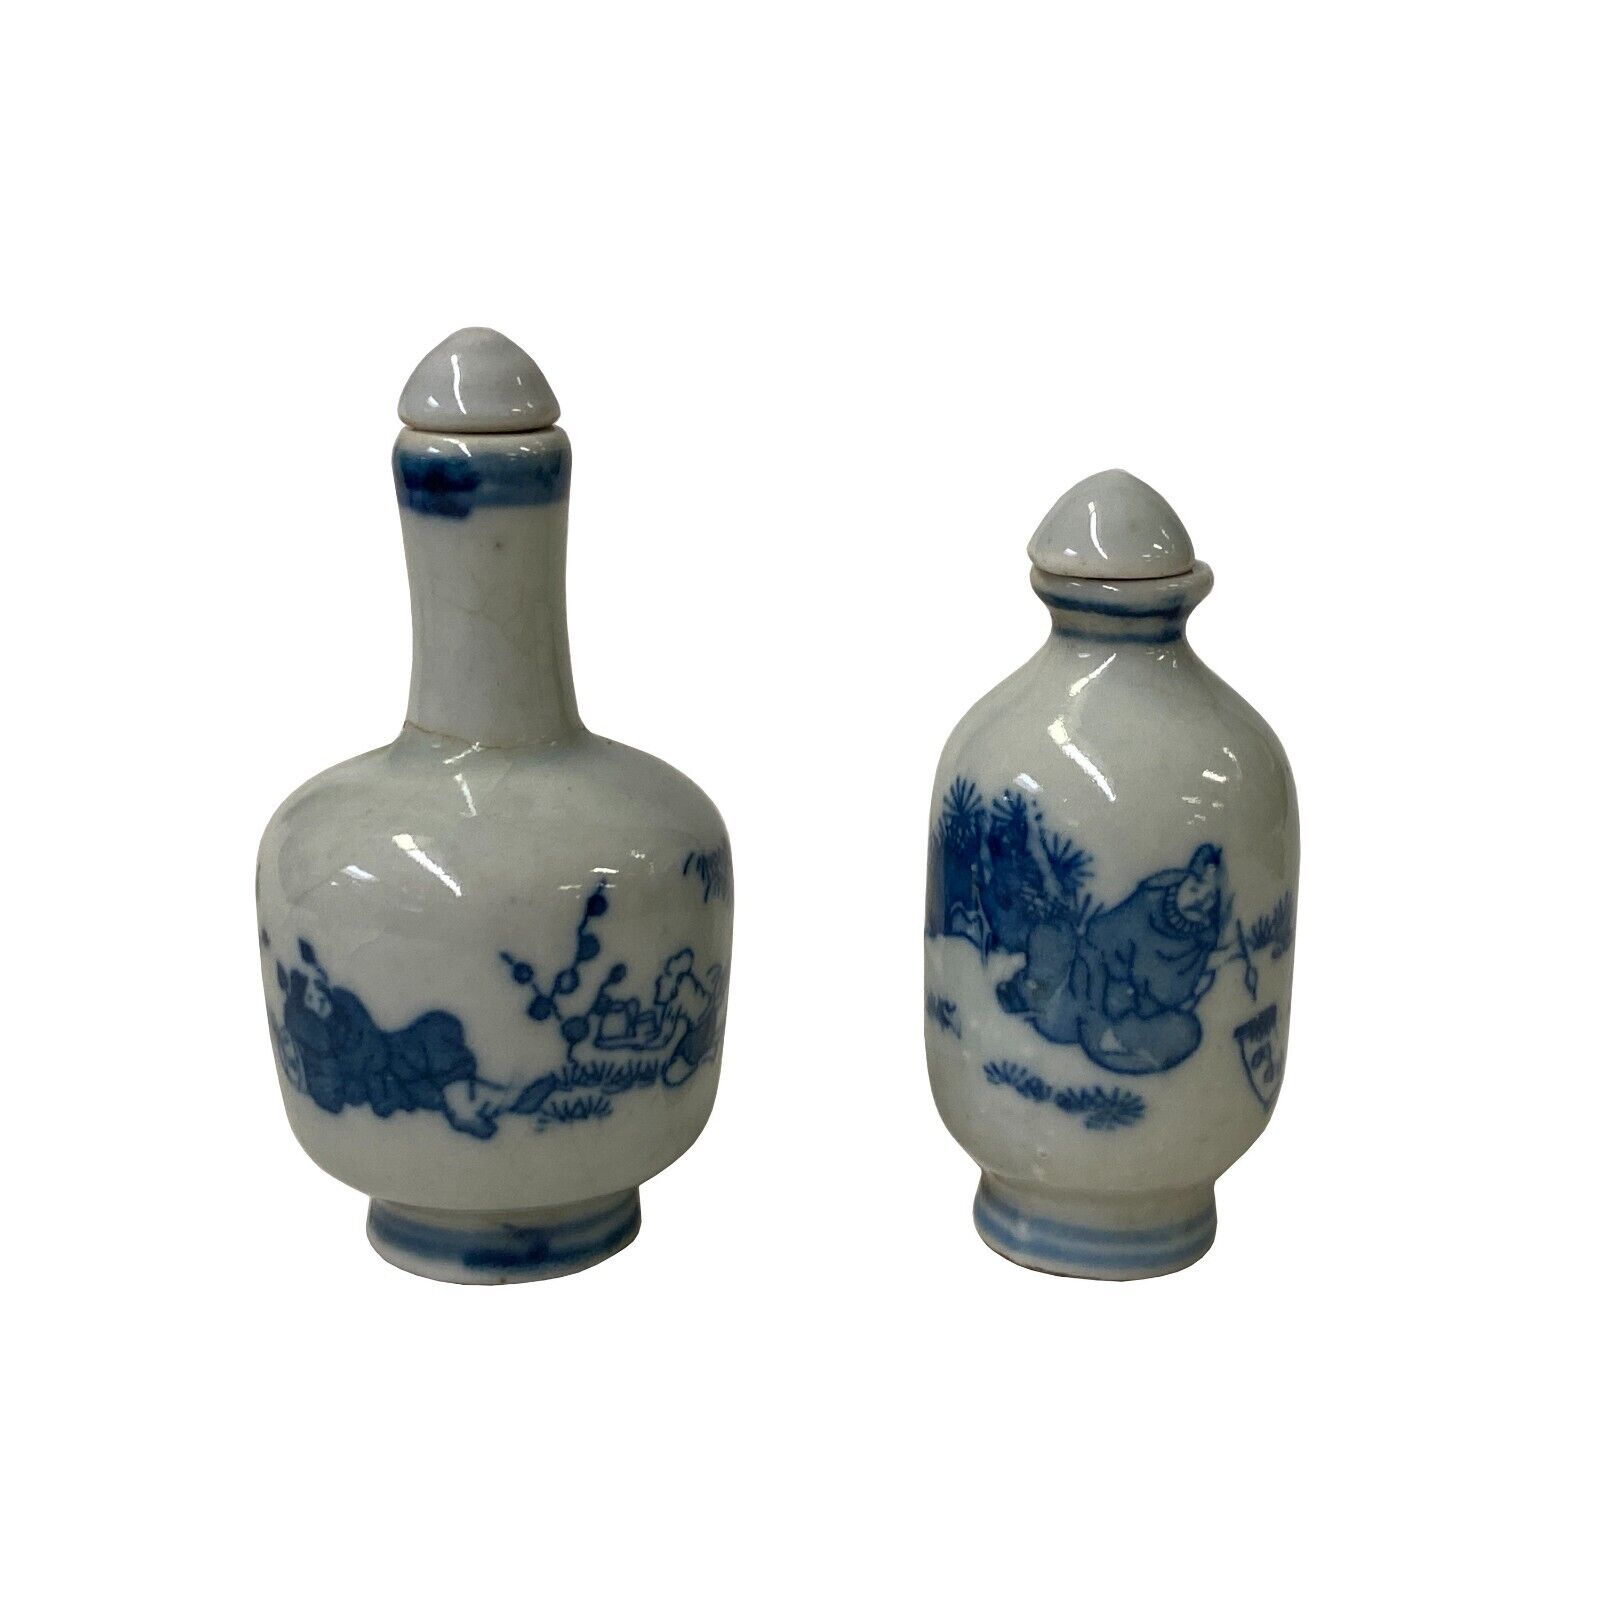 2 x Chinese Porcelain Snuff Bottle With Blue White Scenery Graphic ws2786